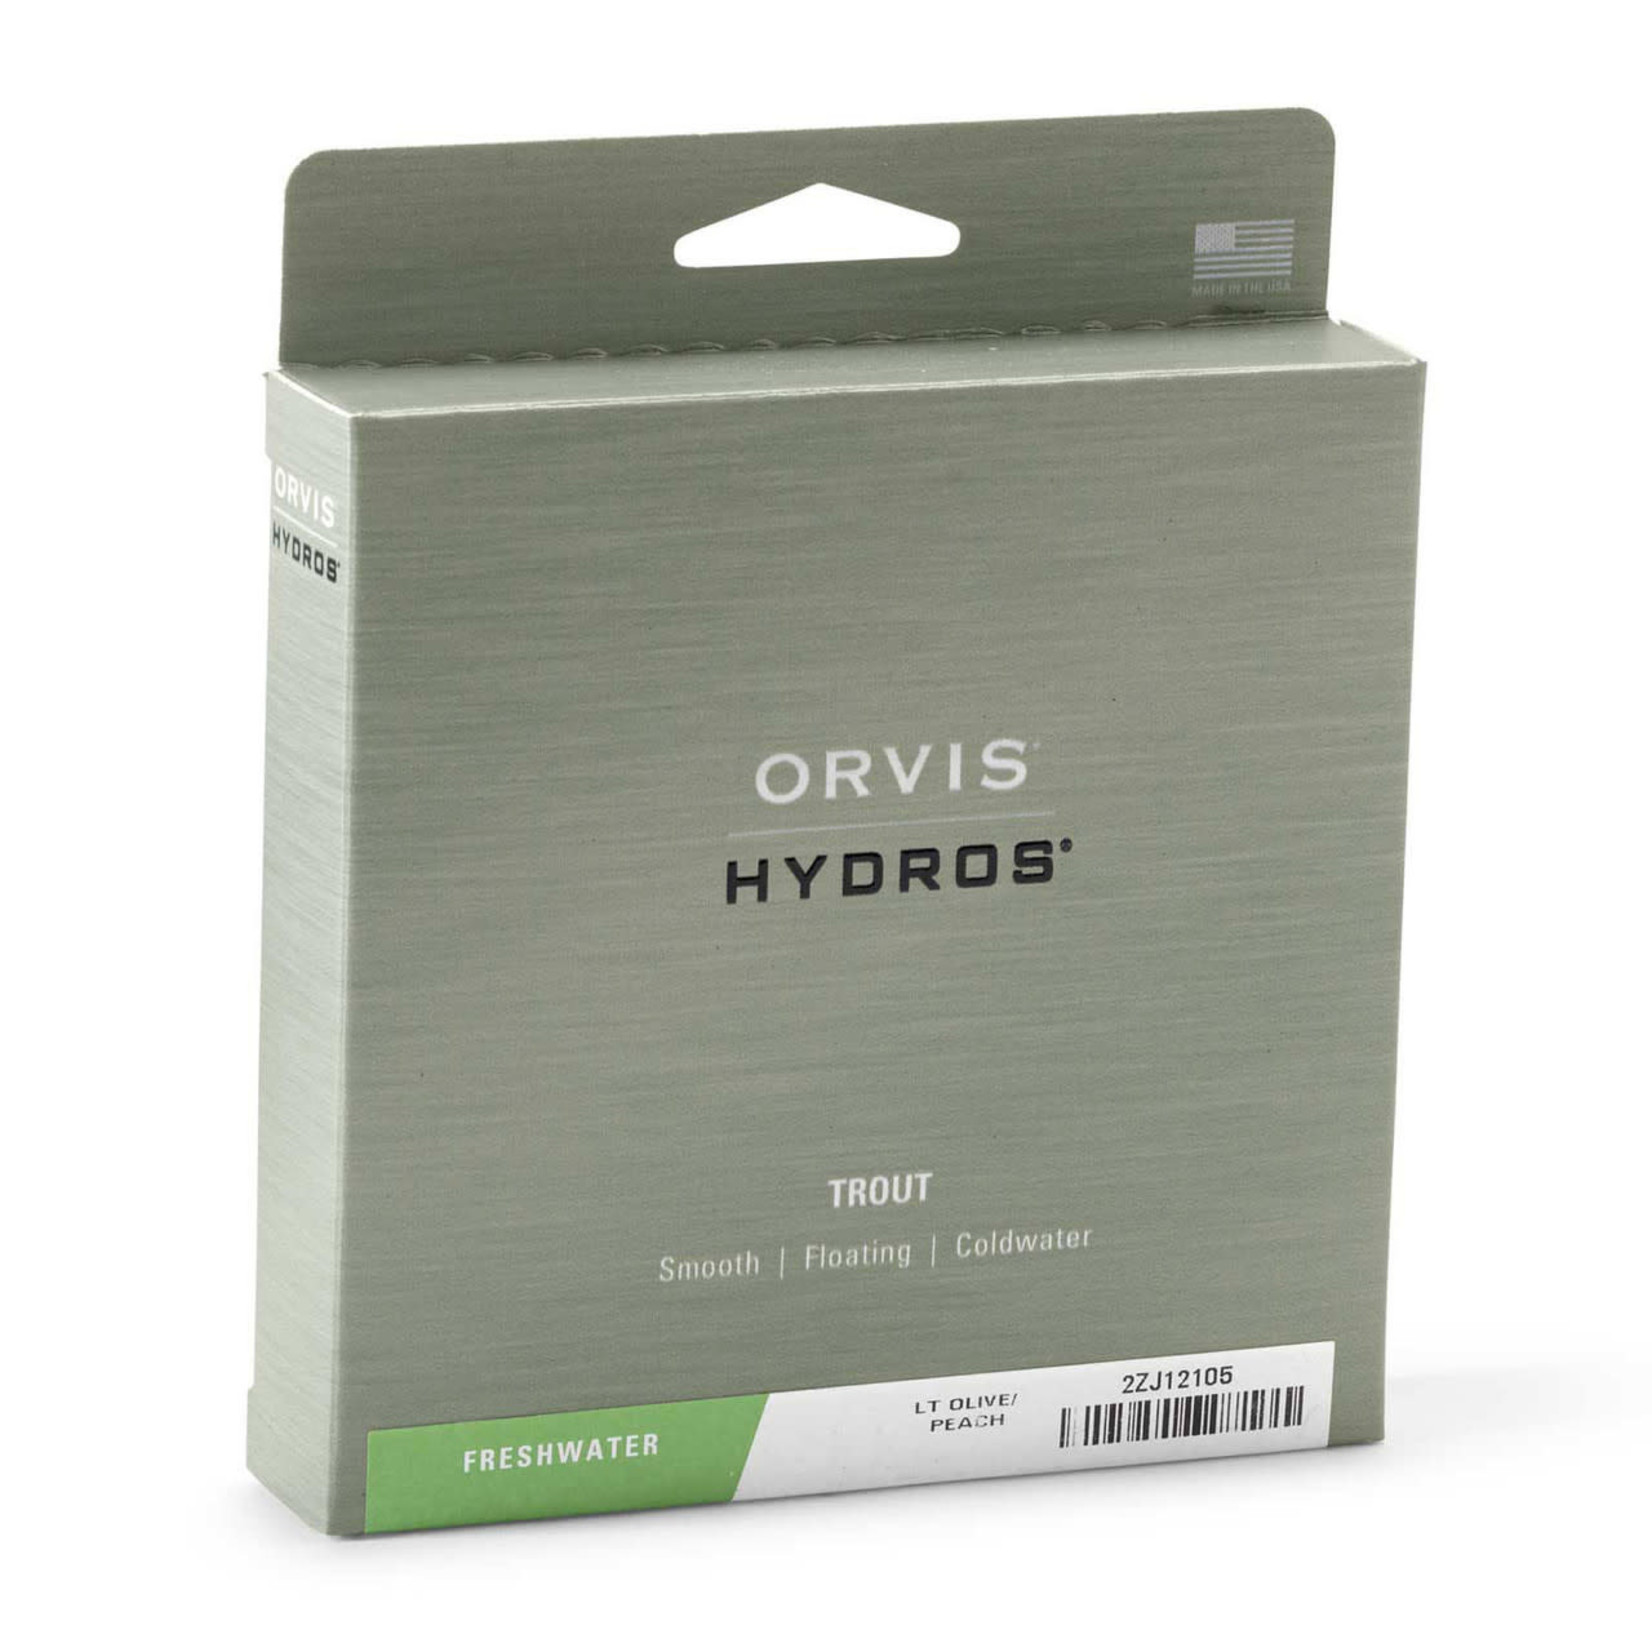 ORVIS Orvis Hydros Trout Fly Line